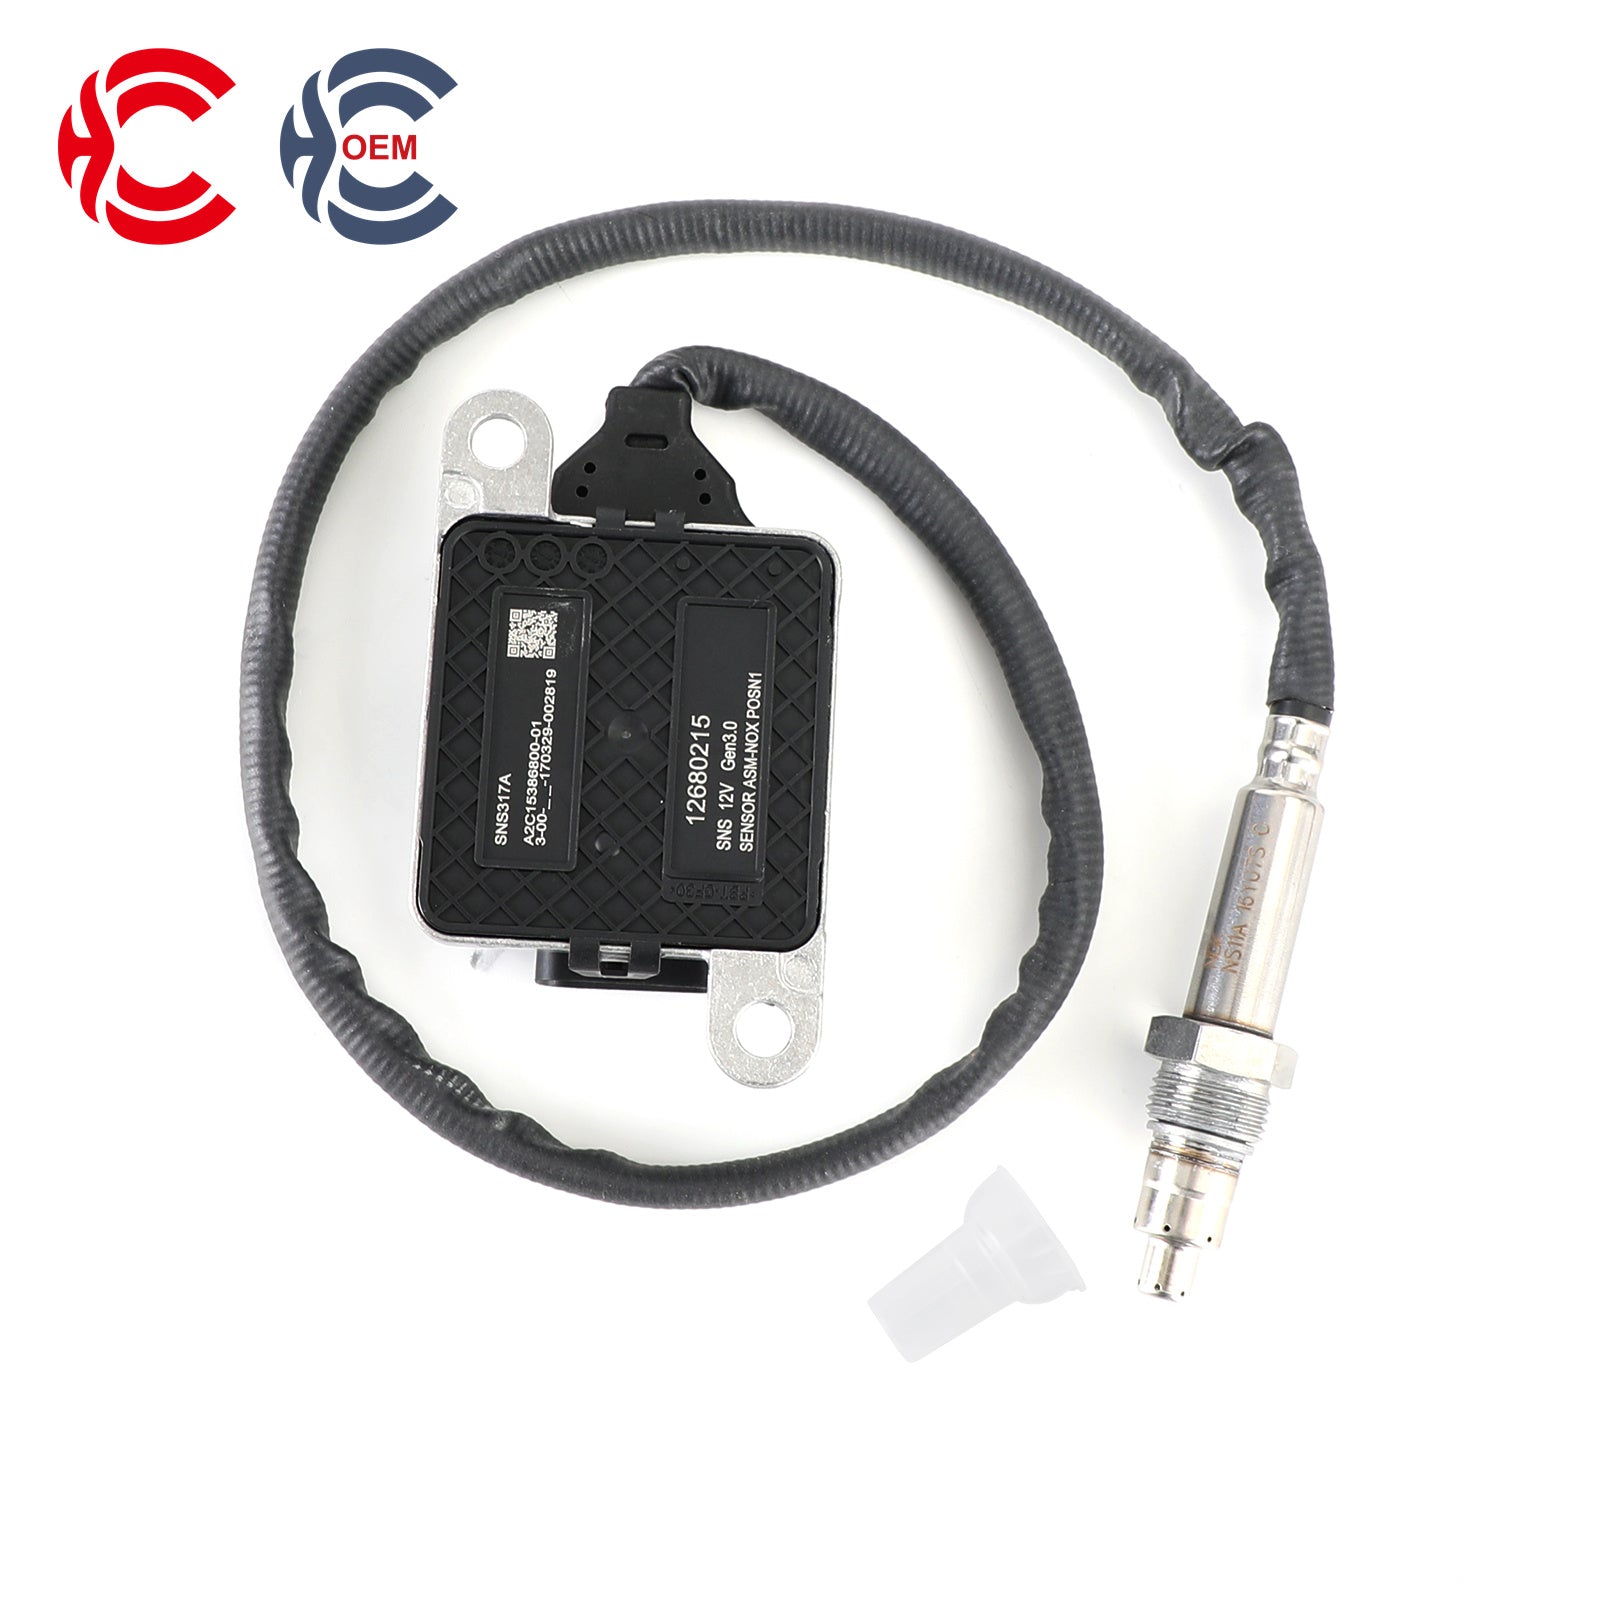 OEM: SNS 317A 12680215Material: ABS metalColor: black silverOrigin: Made in ChinaWeight: 400gPacking List: 1* Nitrogen oxide sensor NOx More ServiceWe can provide OEM Manufacturing serviceWe can Be your one-step solution for Auto PartsWe can provide technical scheme for you Feel Free to Contact Us, We will get back to you as soon as possible.